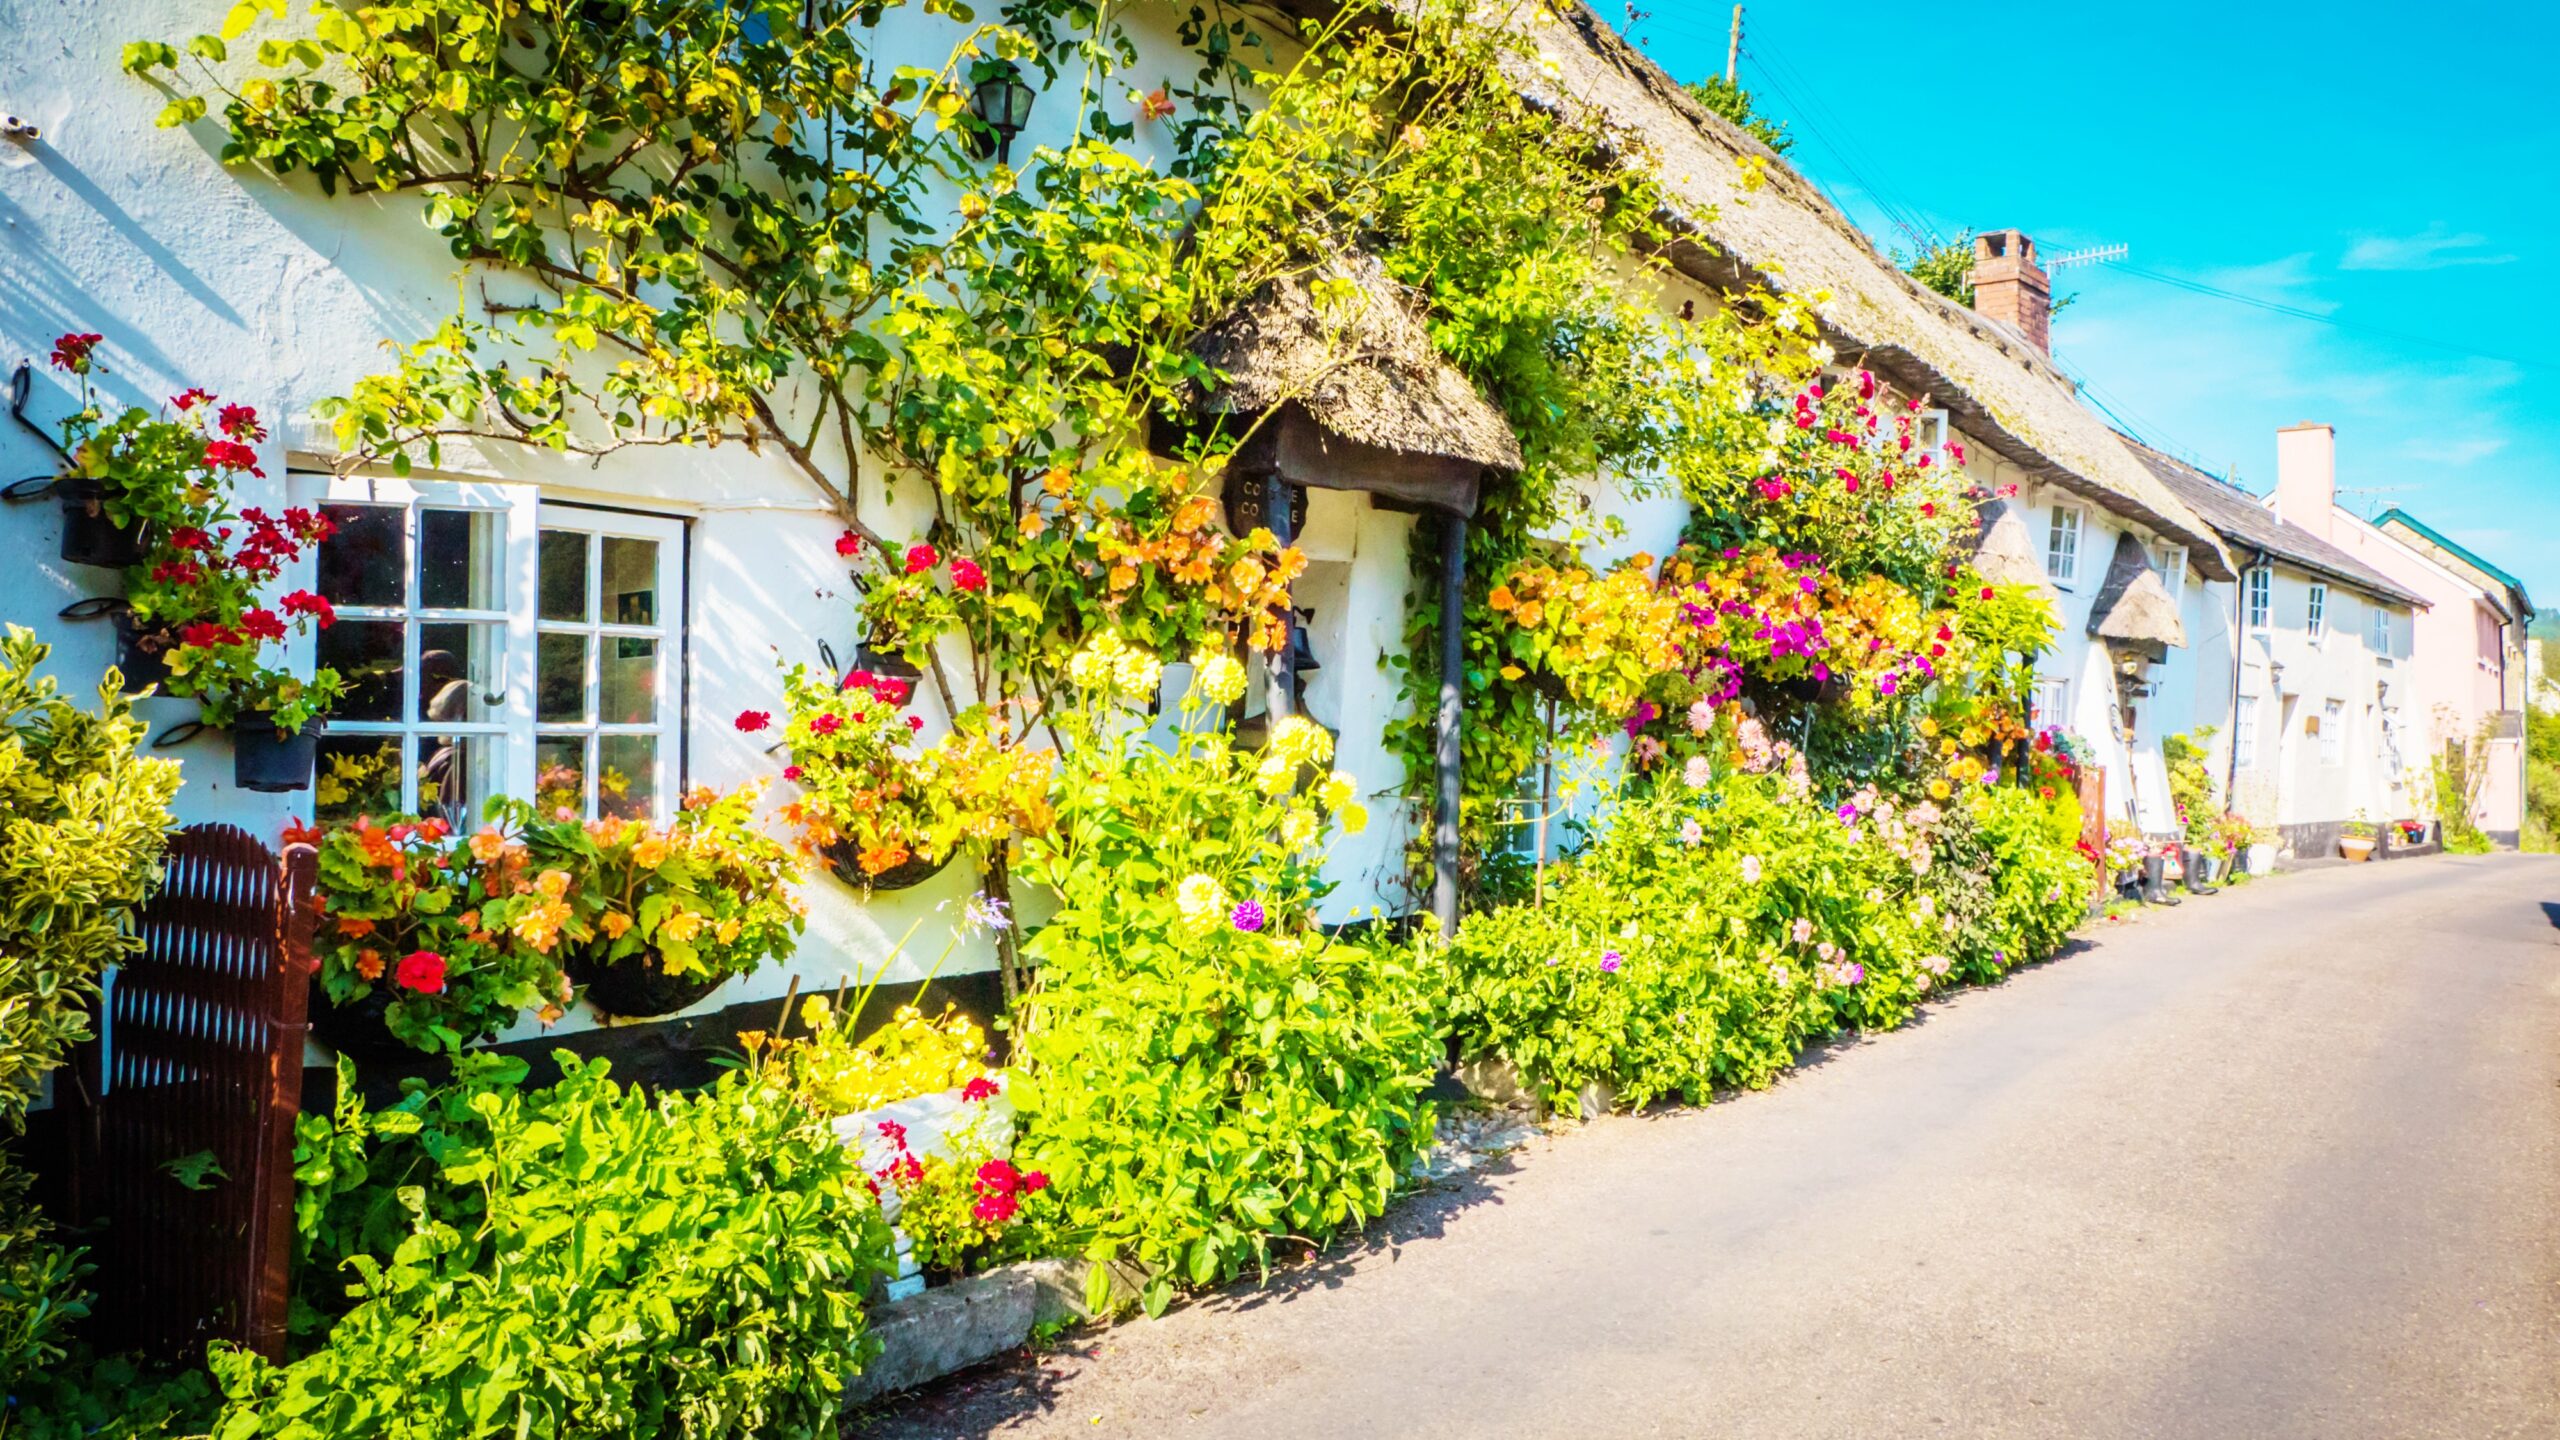 <img src="beautiful.jpg" alt="beautiful cottages in bloom with flowers"/>